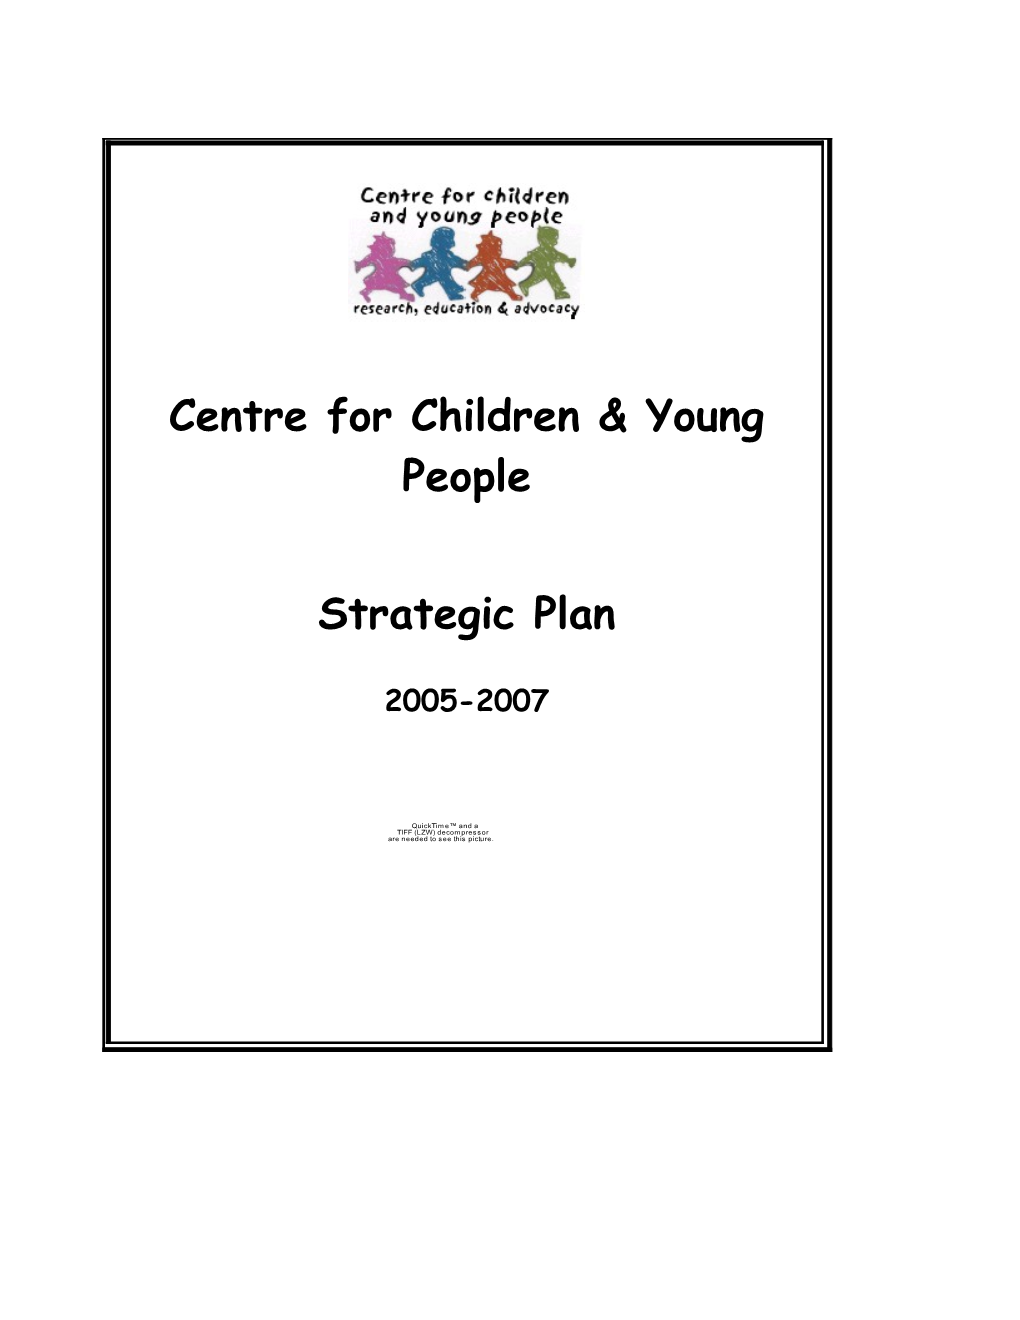 Centre for Children & Young People 3 Year Plan 2005-2007